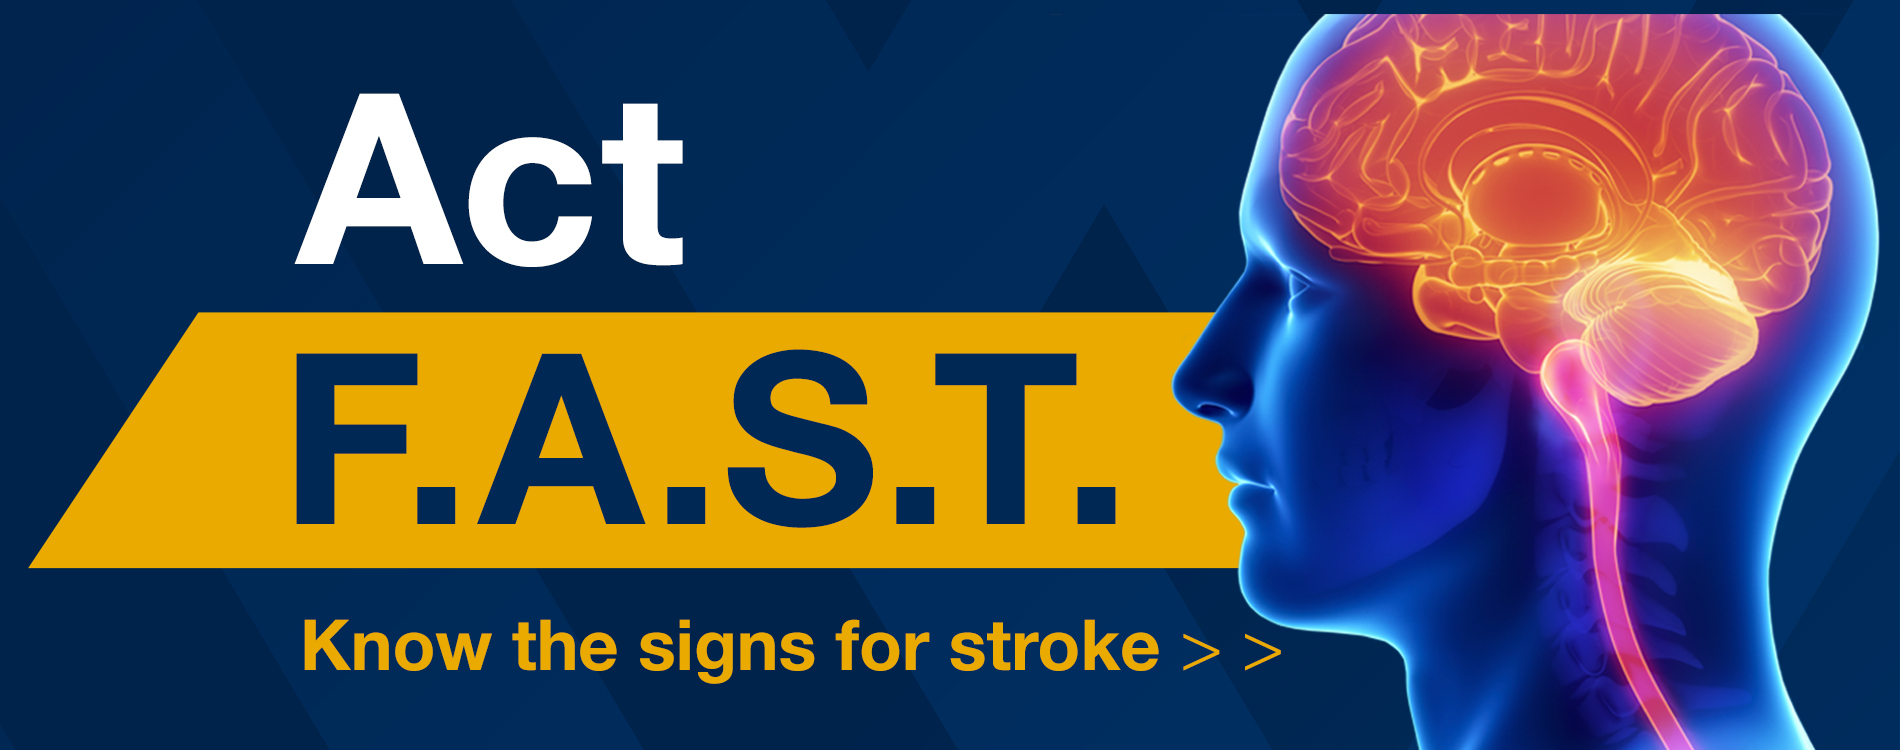 Act F.A.S.T. Know the signs of stroke header image